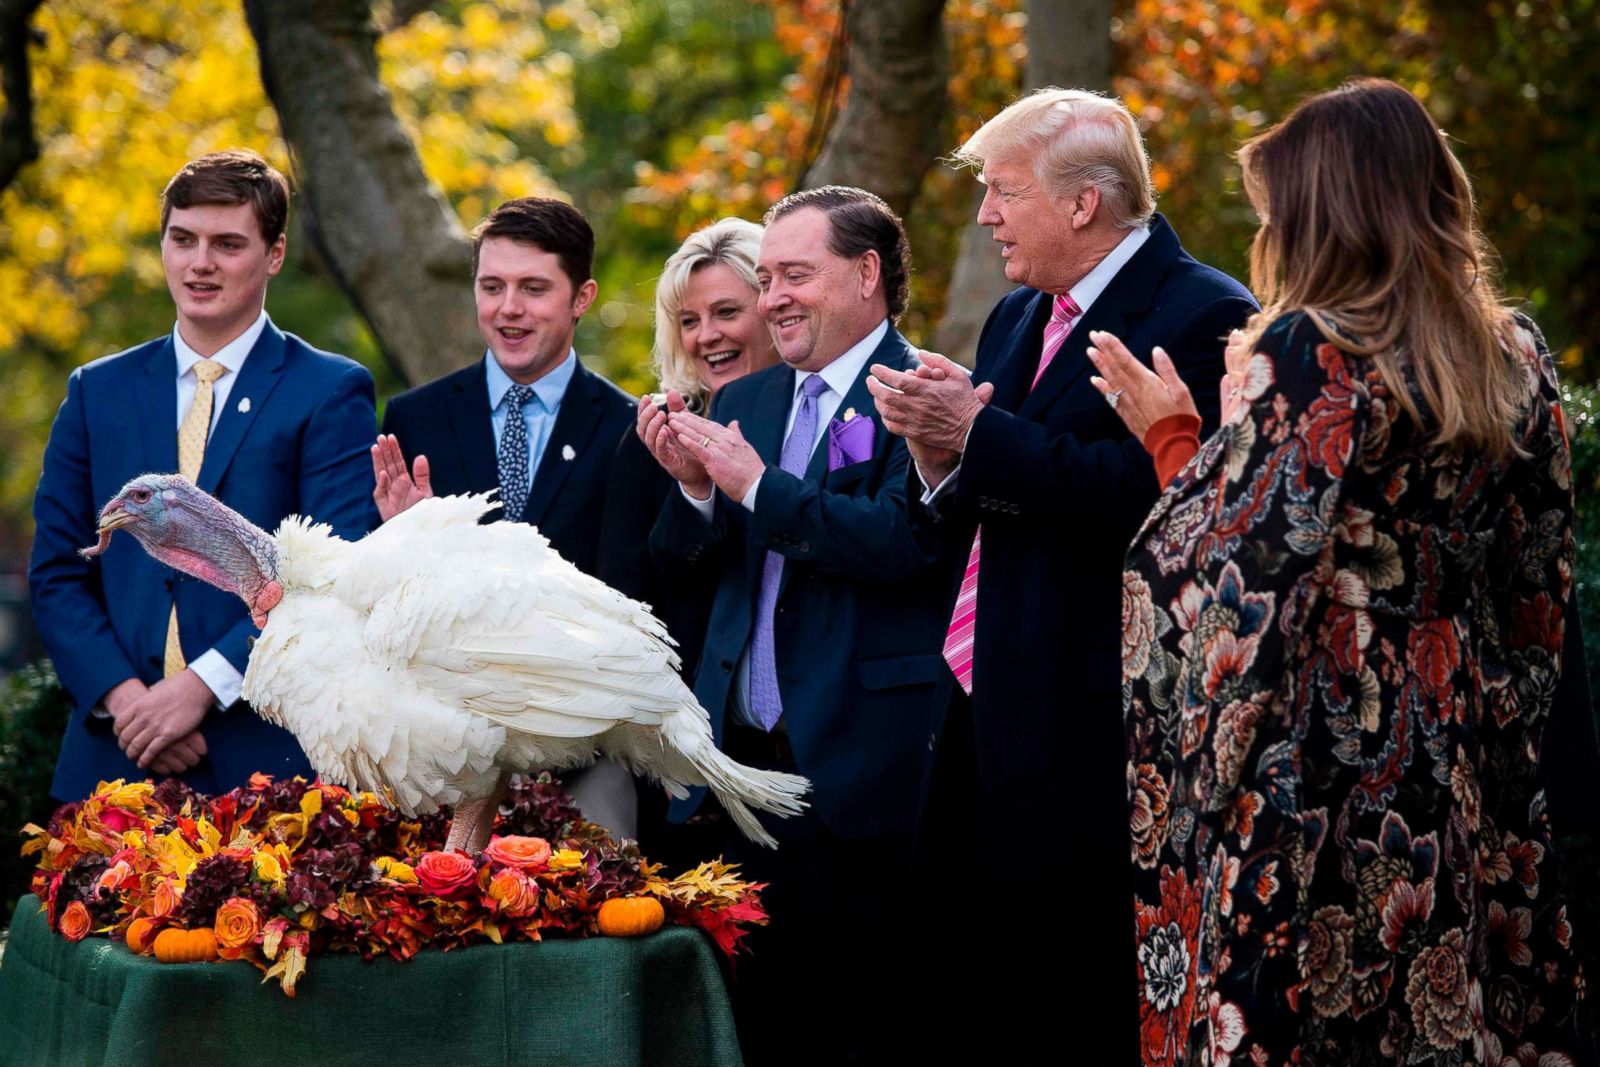 Thanksgiving traditions at the White House Photos Image 161 ABC News